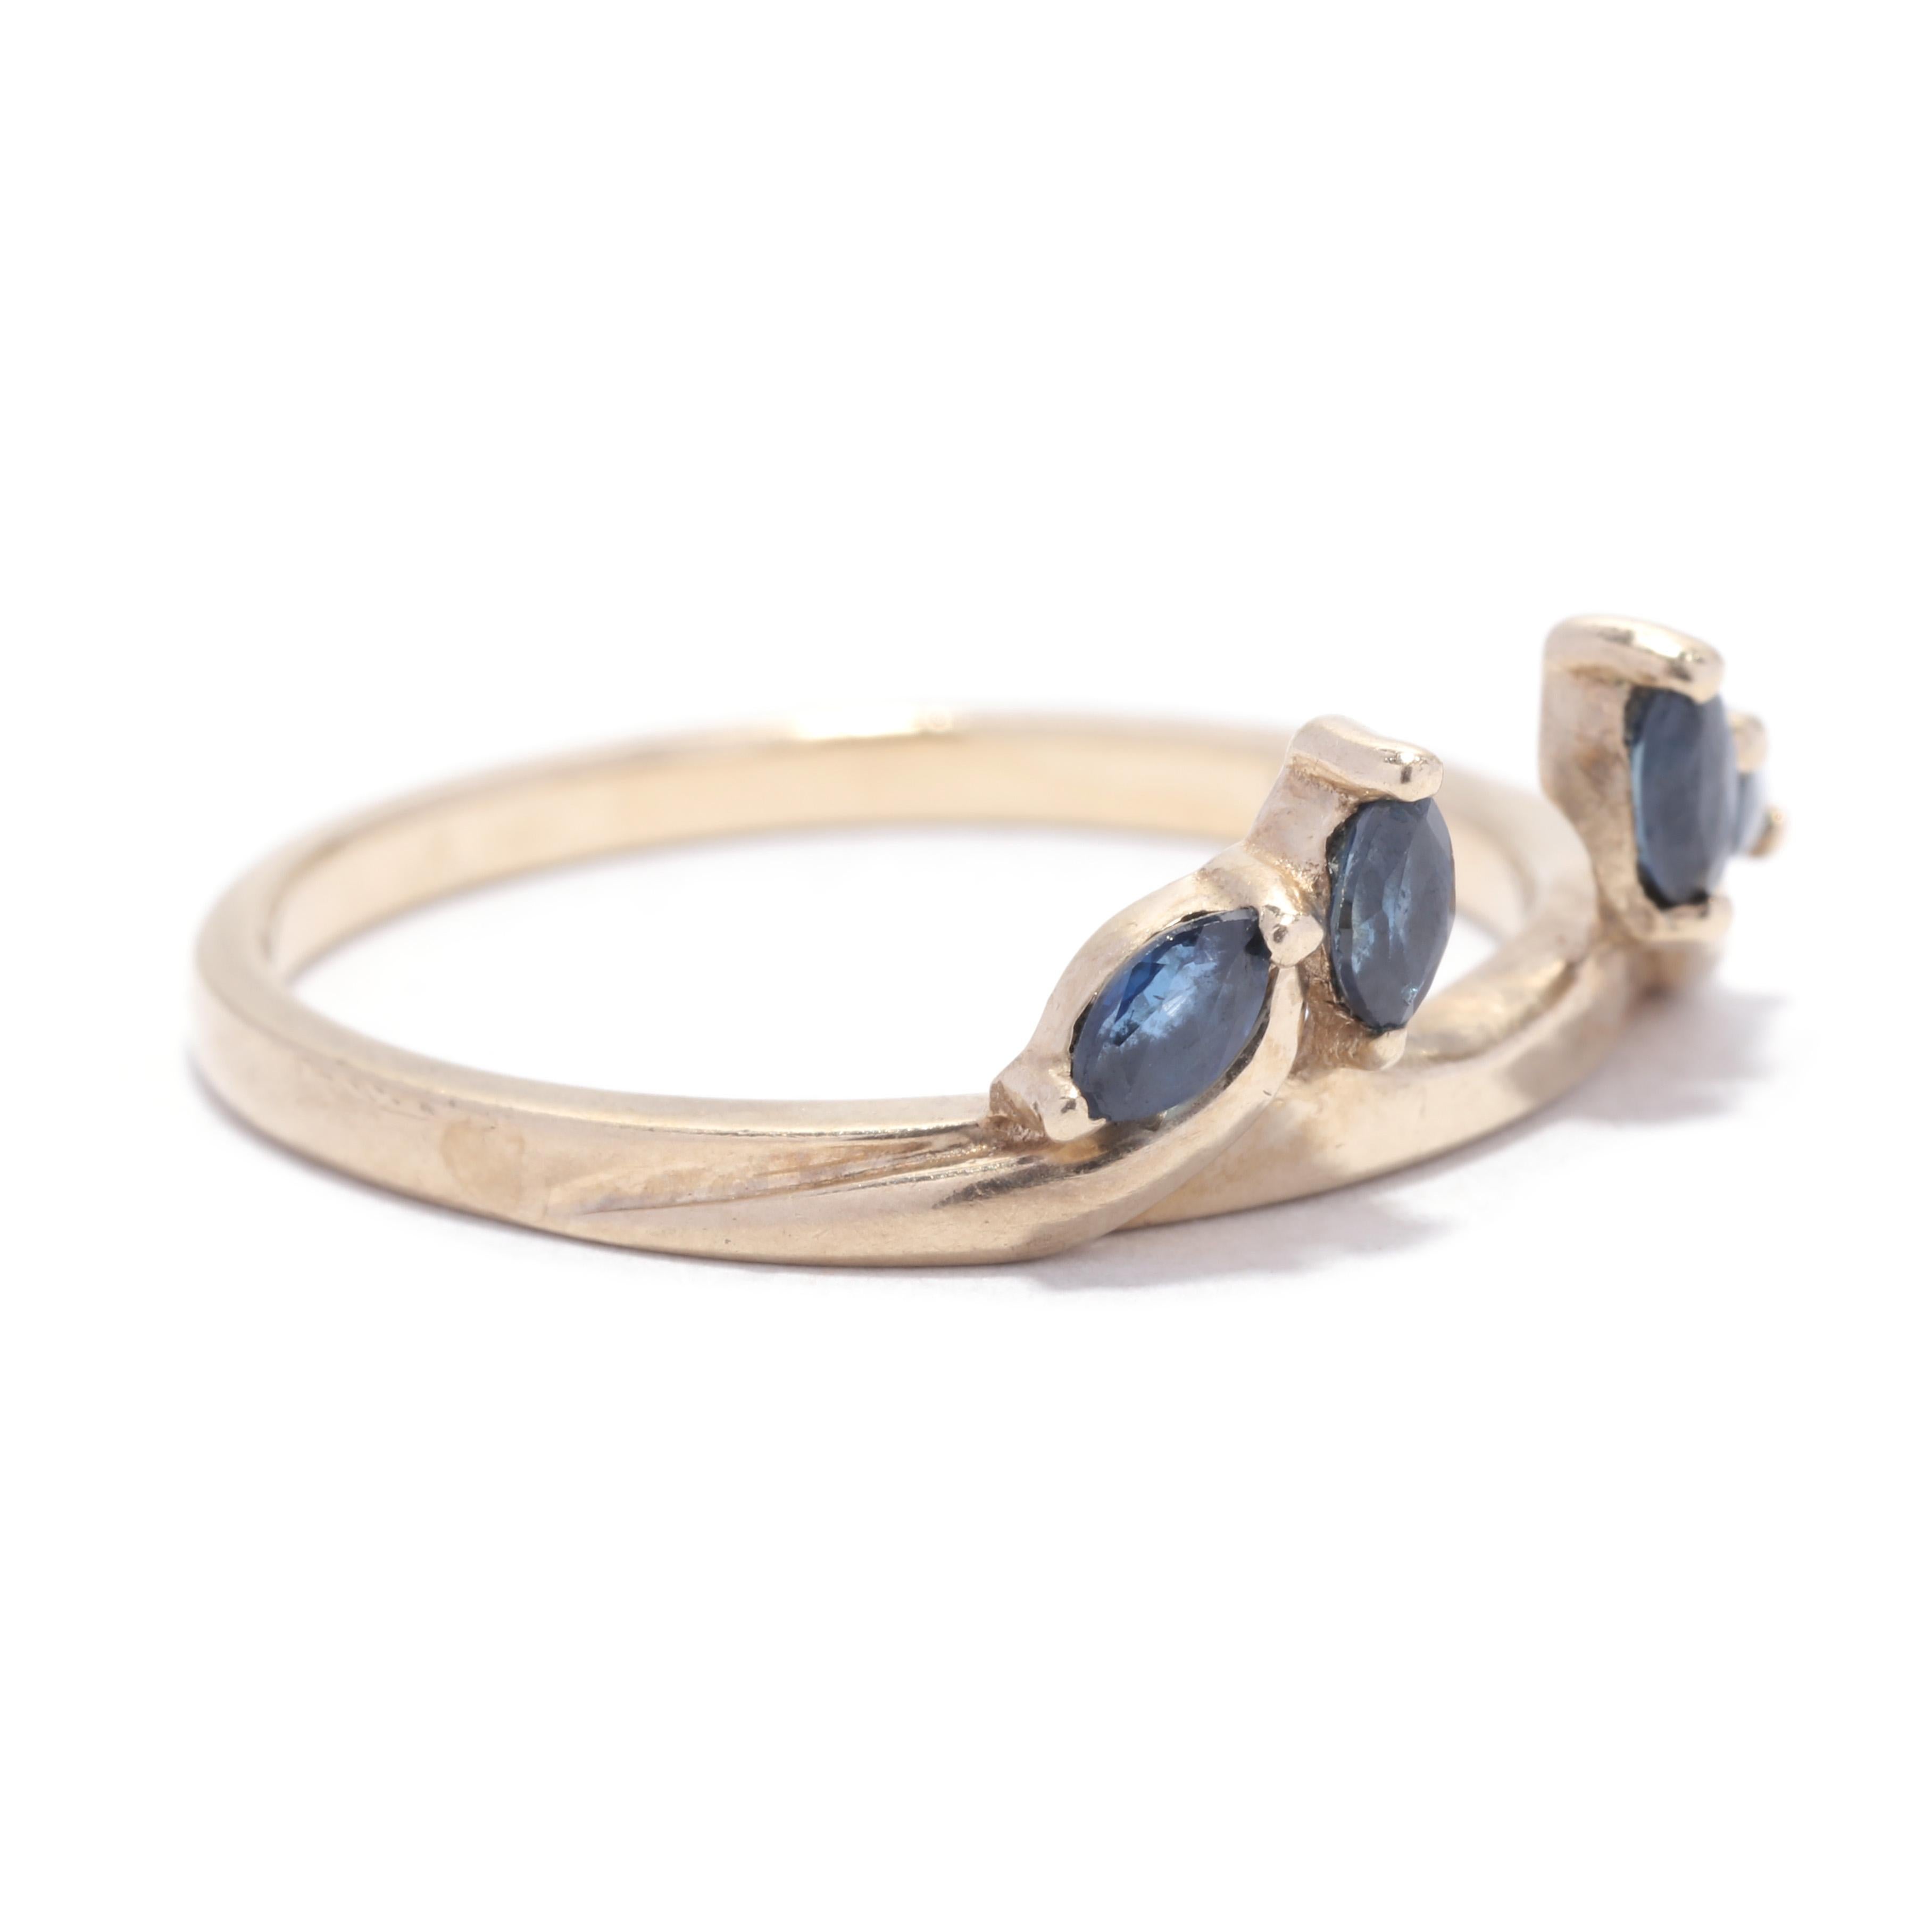 A vintage 10 karat yellow gold marquise sapphire wrap ring guard. This stackable ring jacket features two prong set marquise cut sapphires on either side weighing approximately .30 total carats and with a space in the center for a solitaire